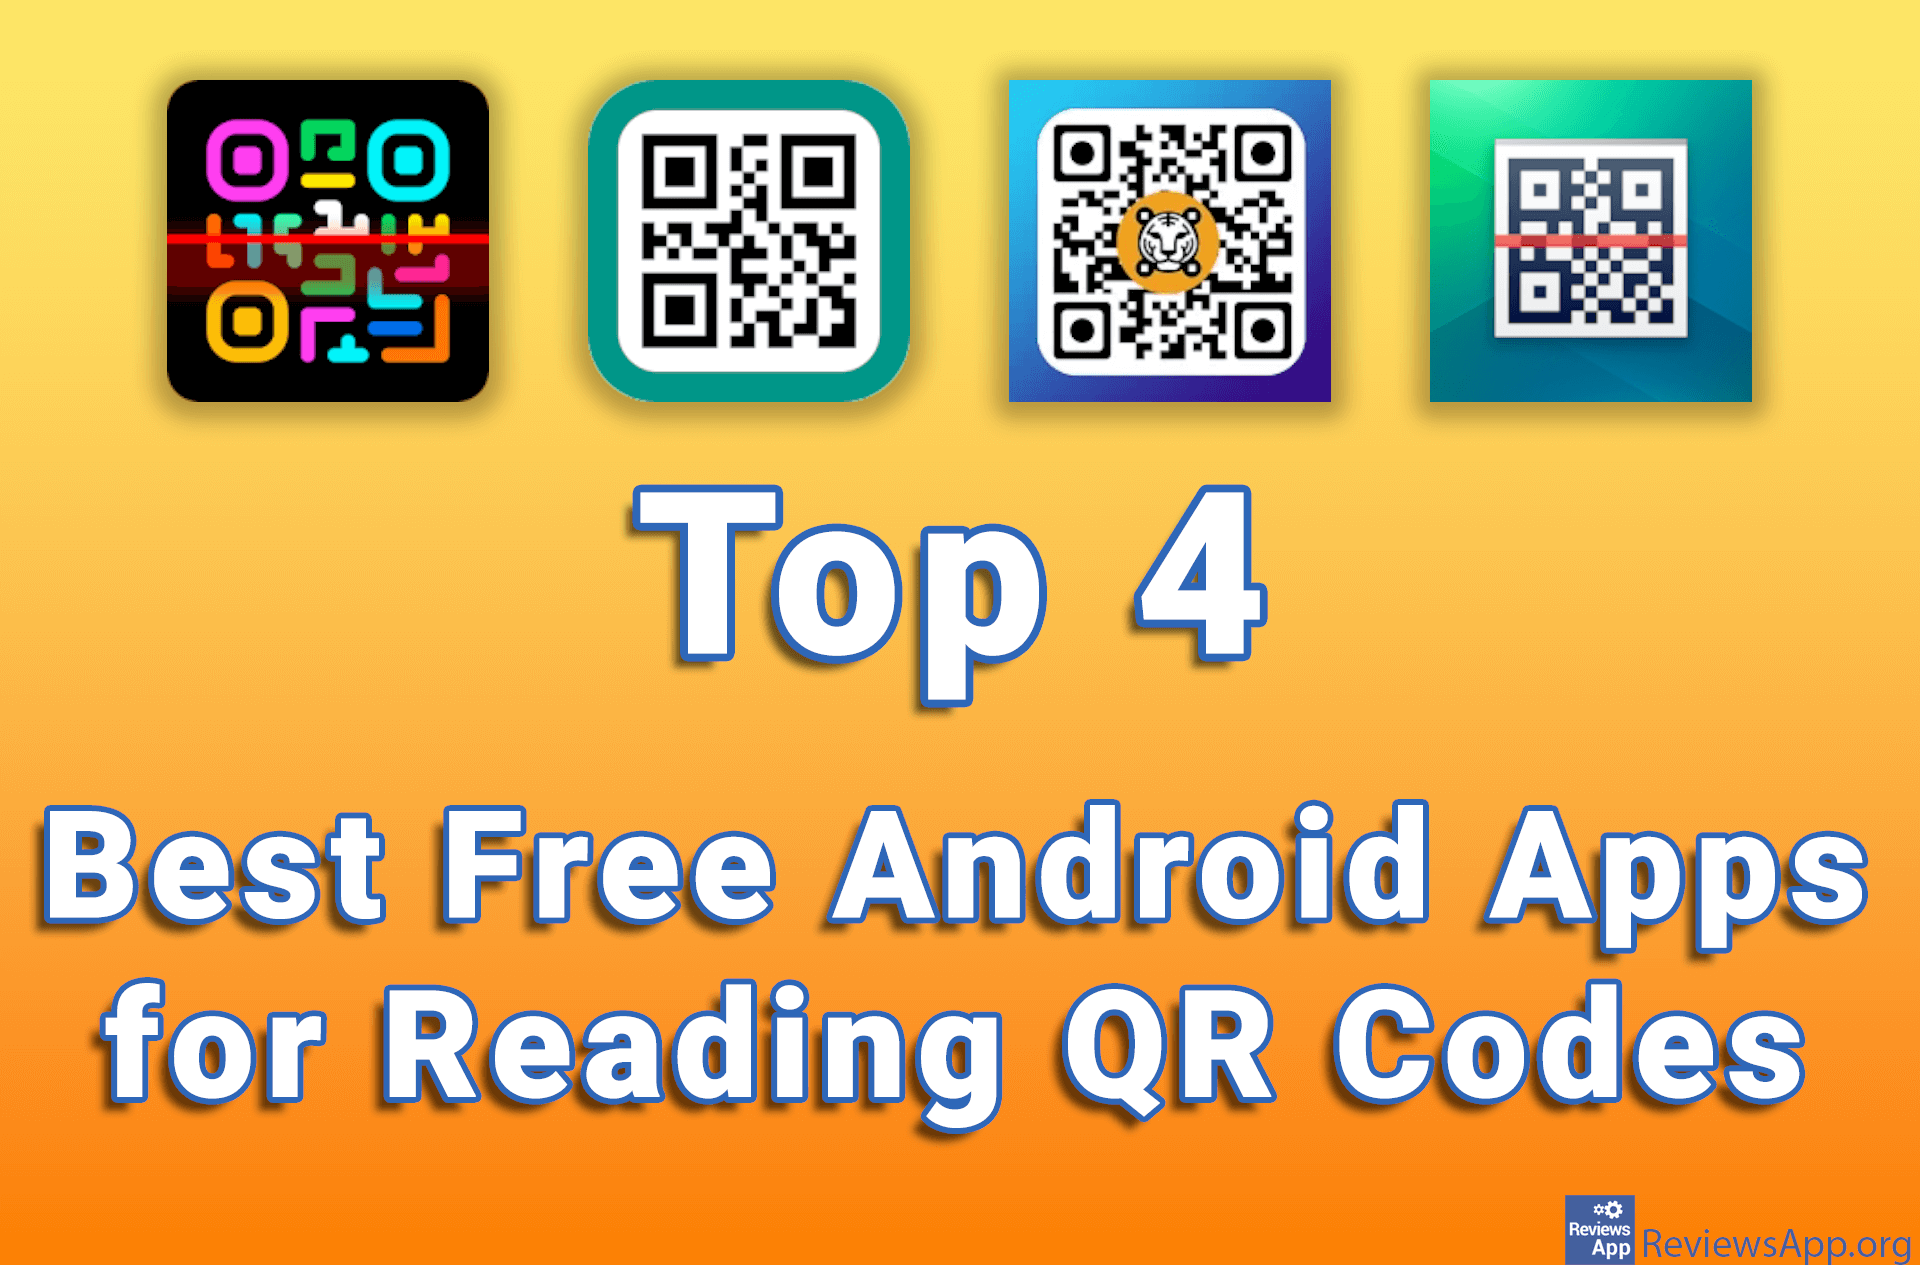 Top 4 Best Free Android Apps for Reading QR Codes